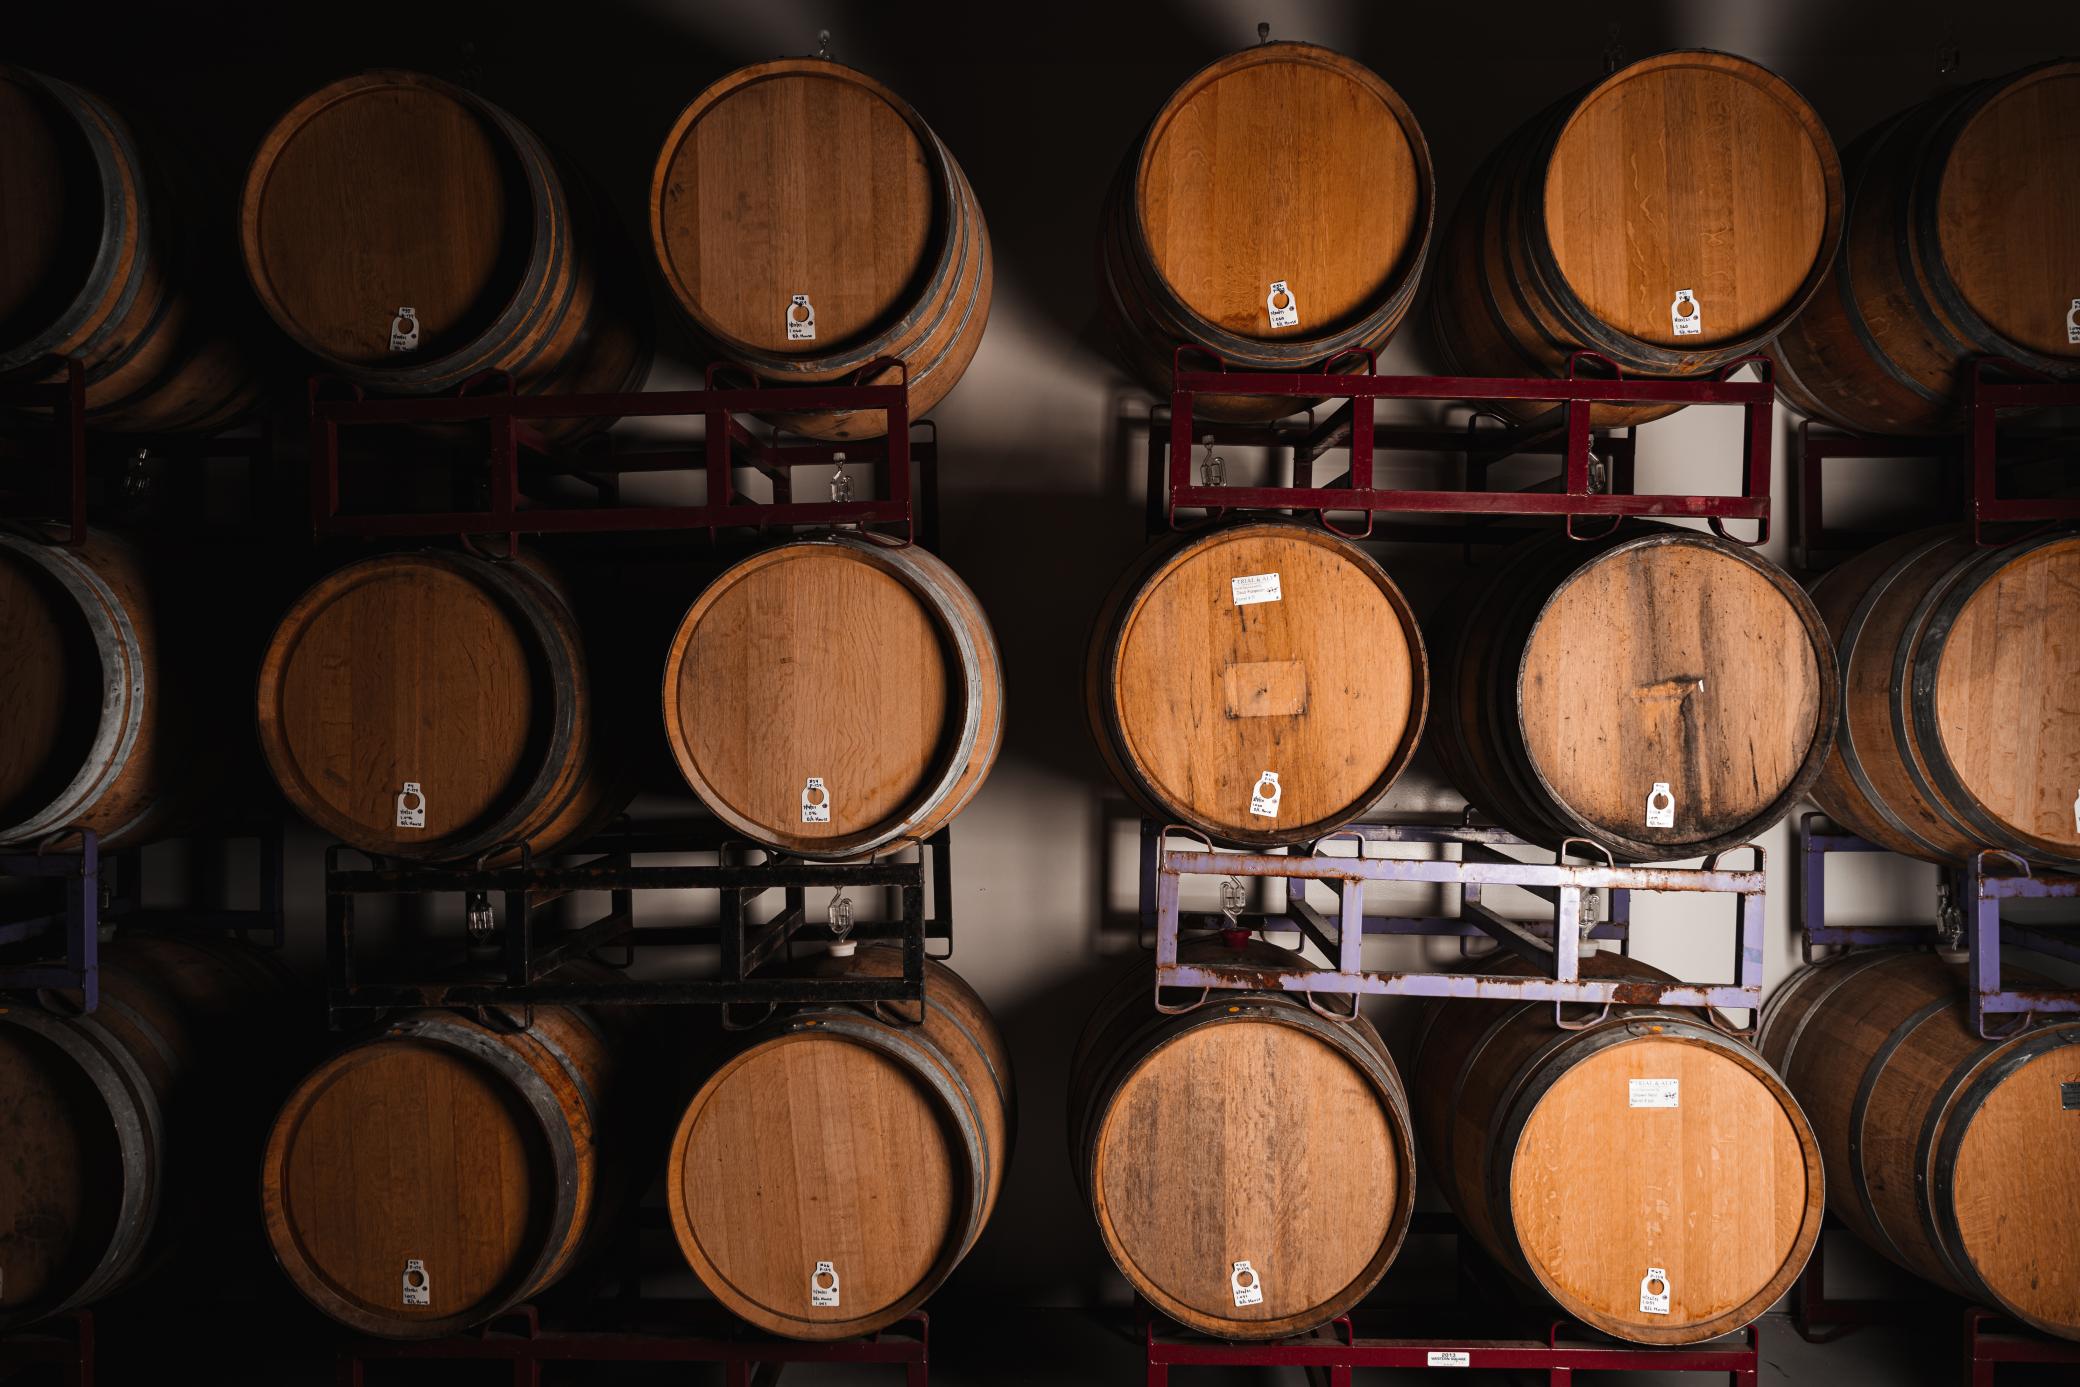 Some of the wine barrels used to make Trial & Ale’s sour and wild artisanal ales. Photo courtesy Ian Breitzke and Trial & Ale